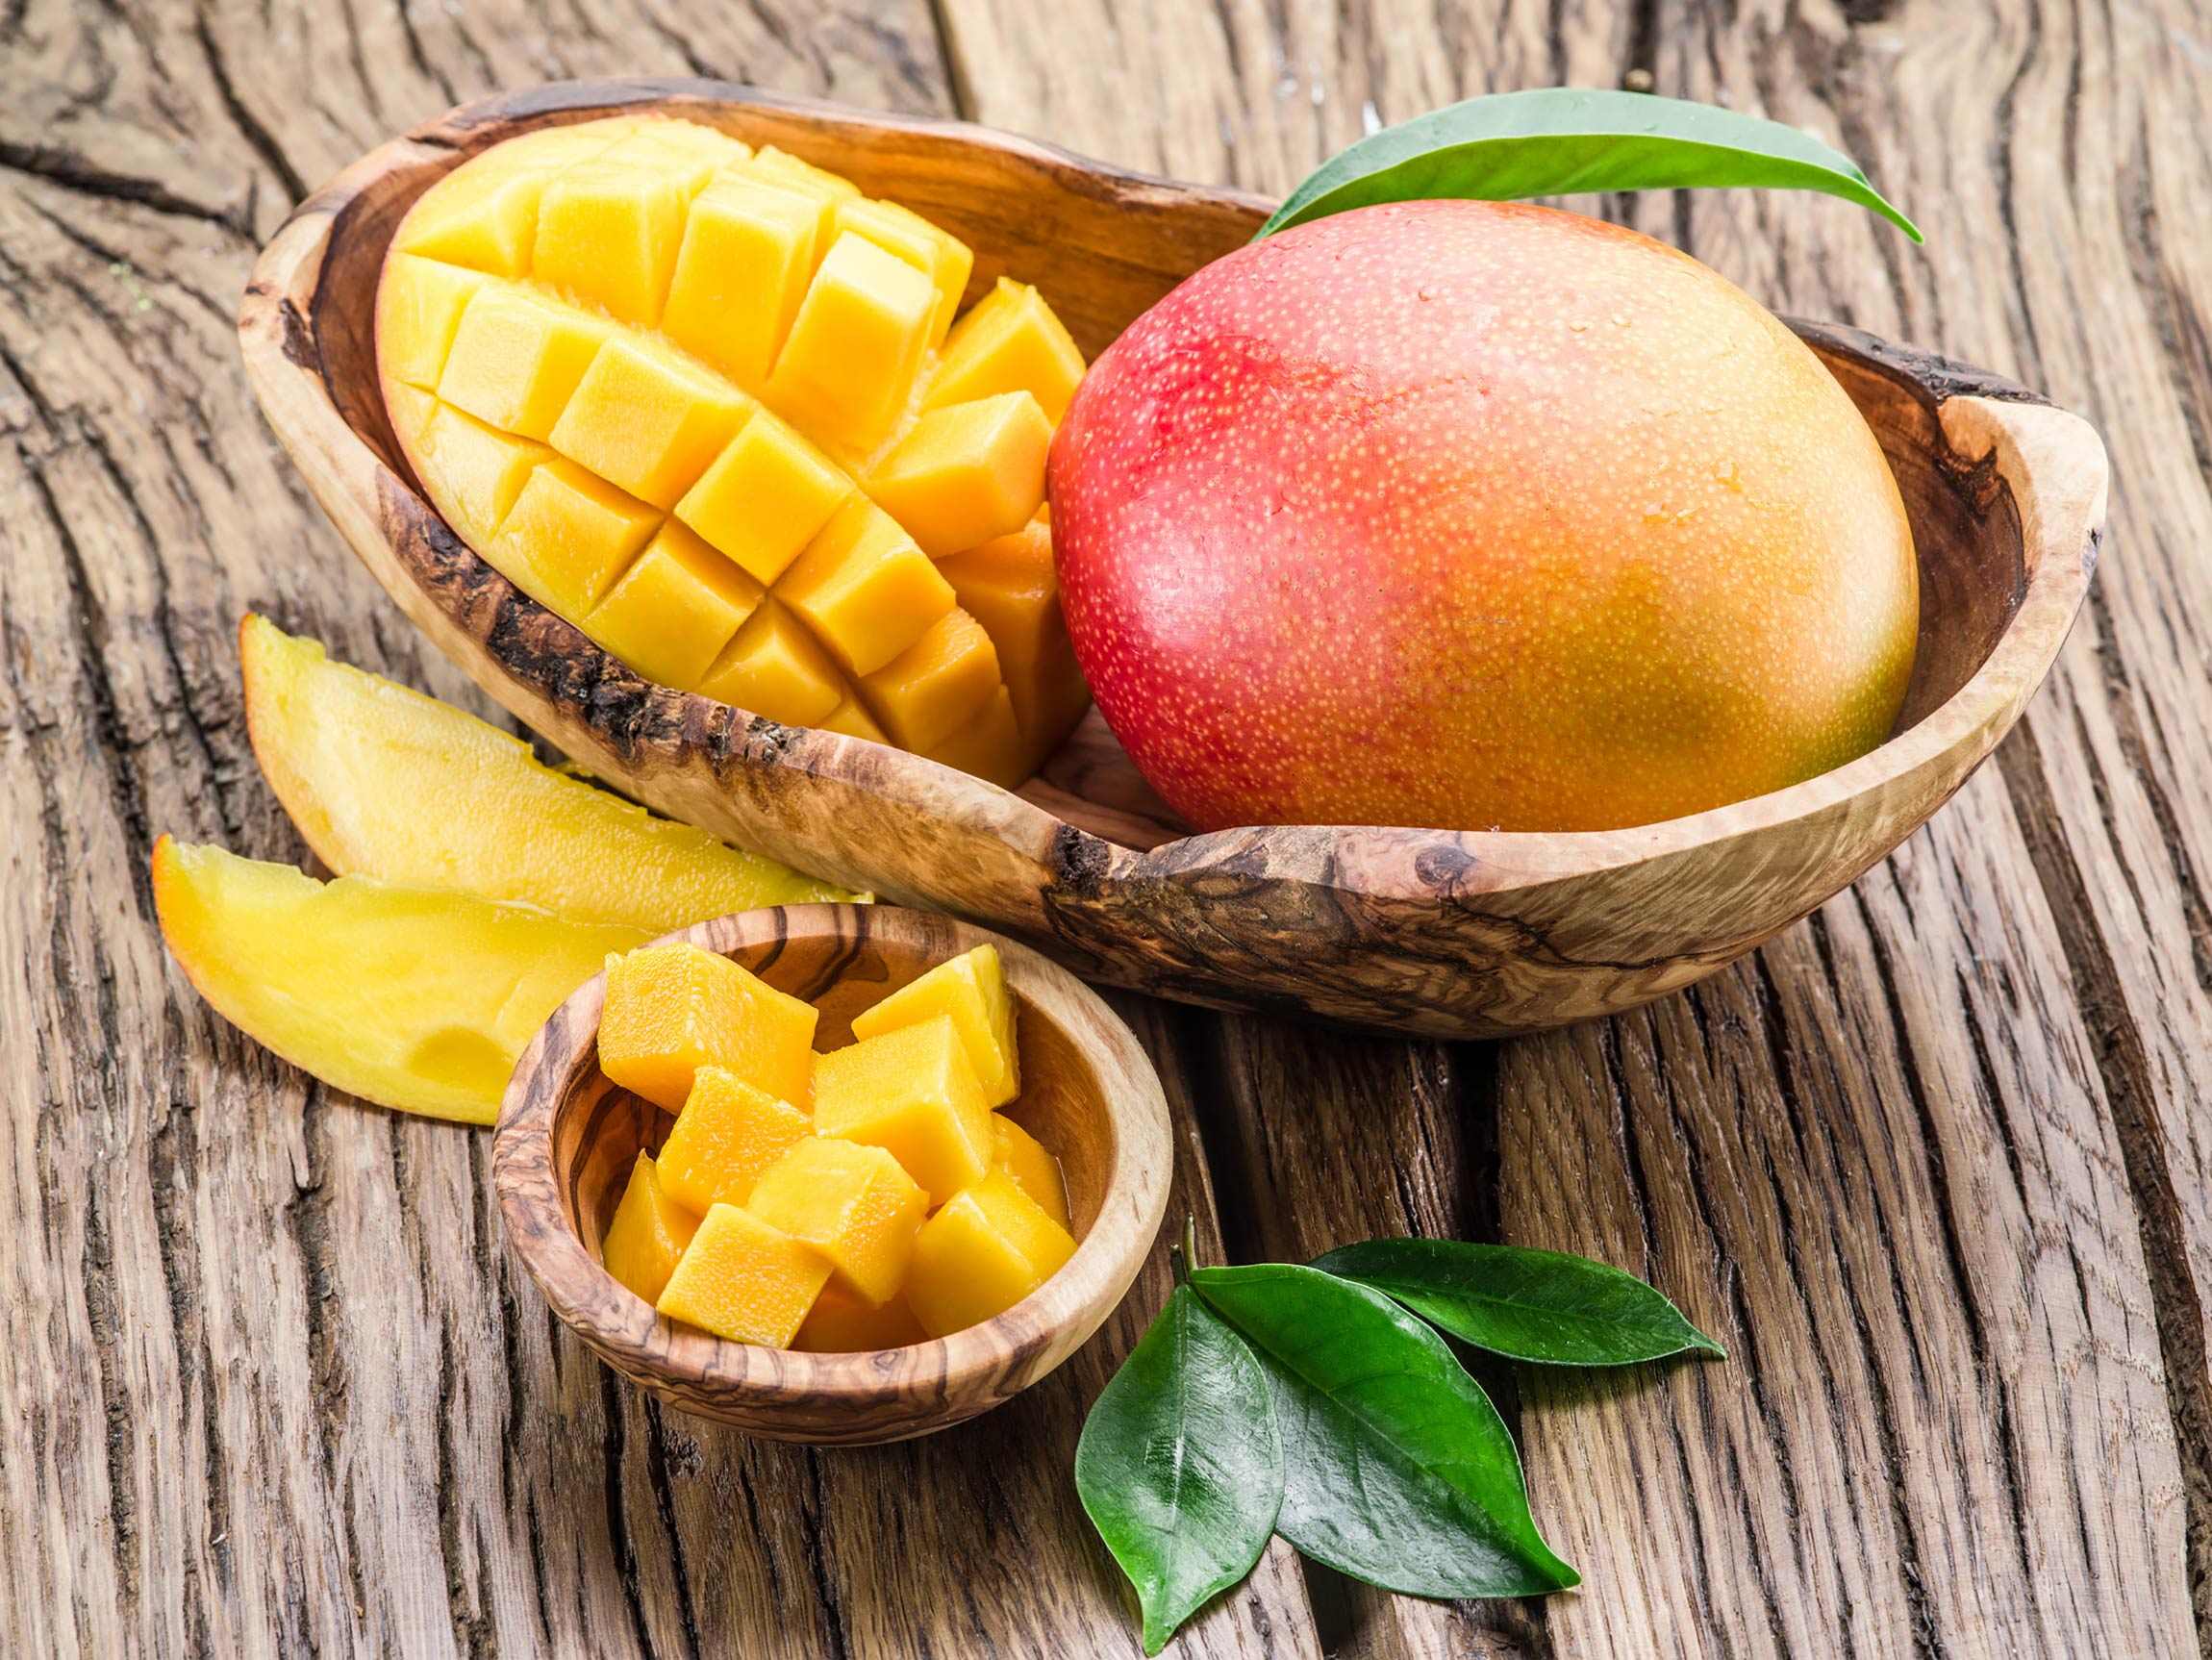 mango and cut mango in wooden bowl on table